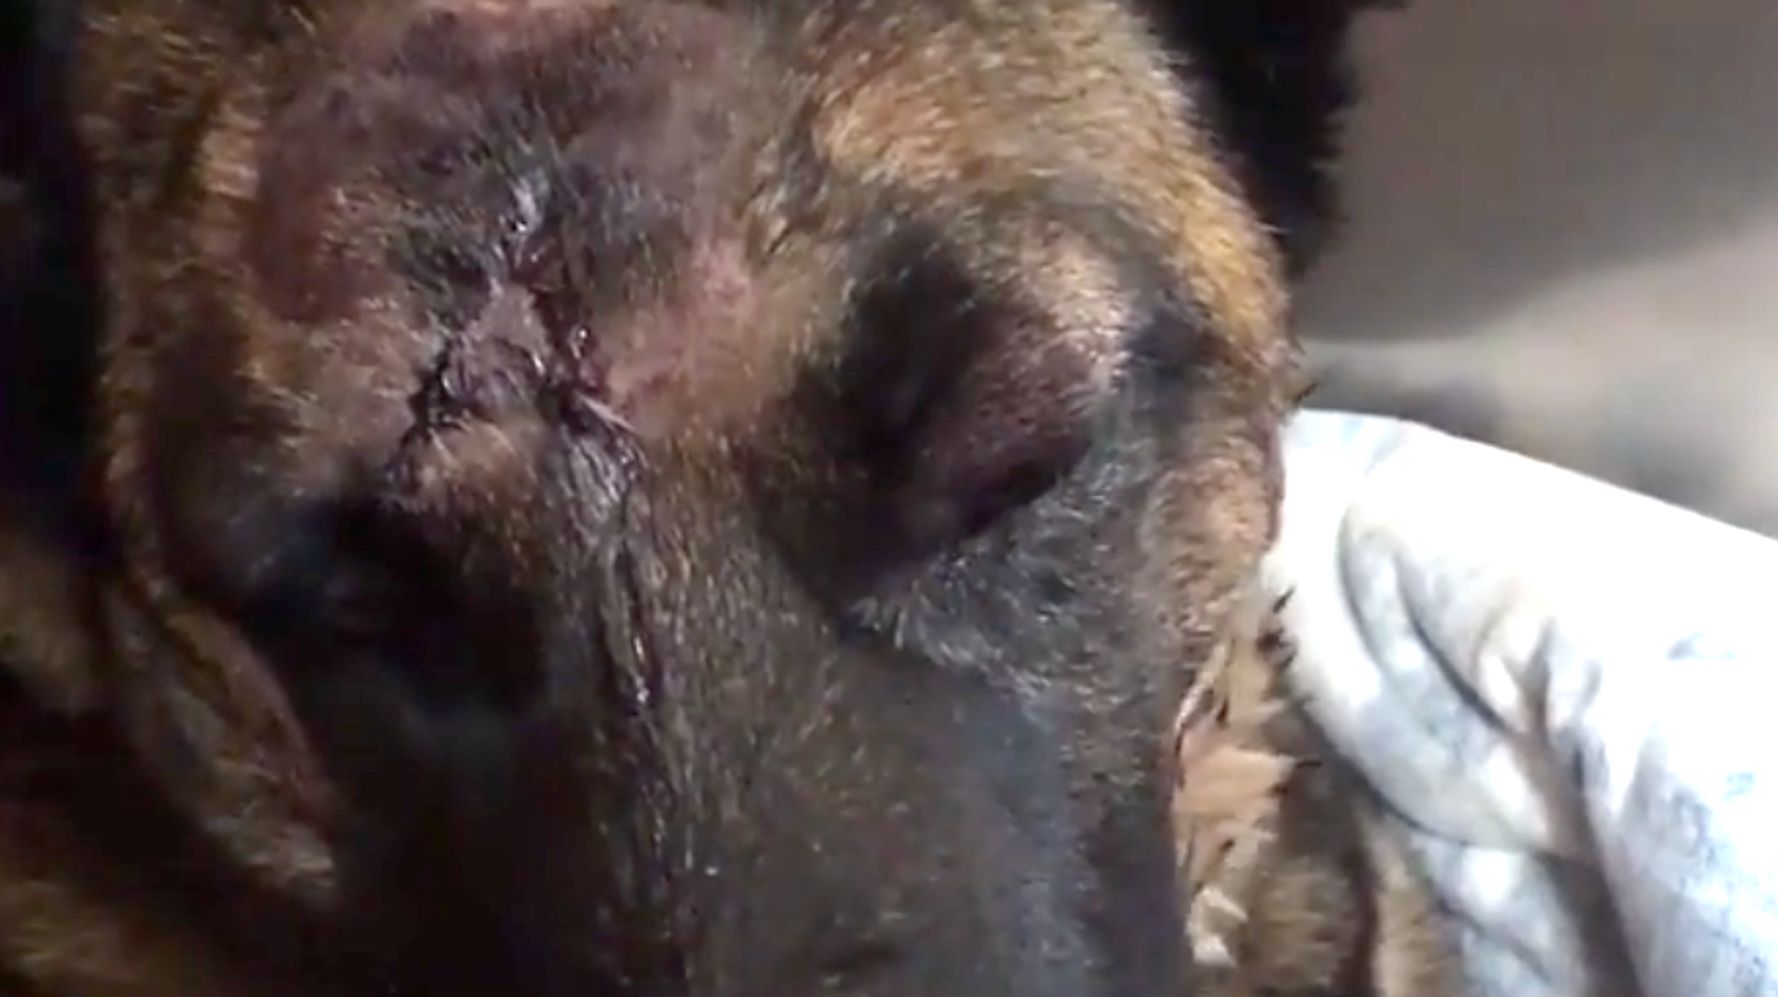 'I Owe Her My Life': Dog On The Mend After Rescuing Owner From Mountain Lion